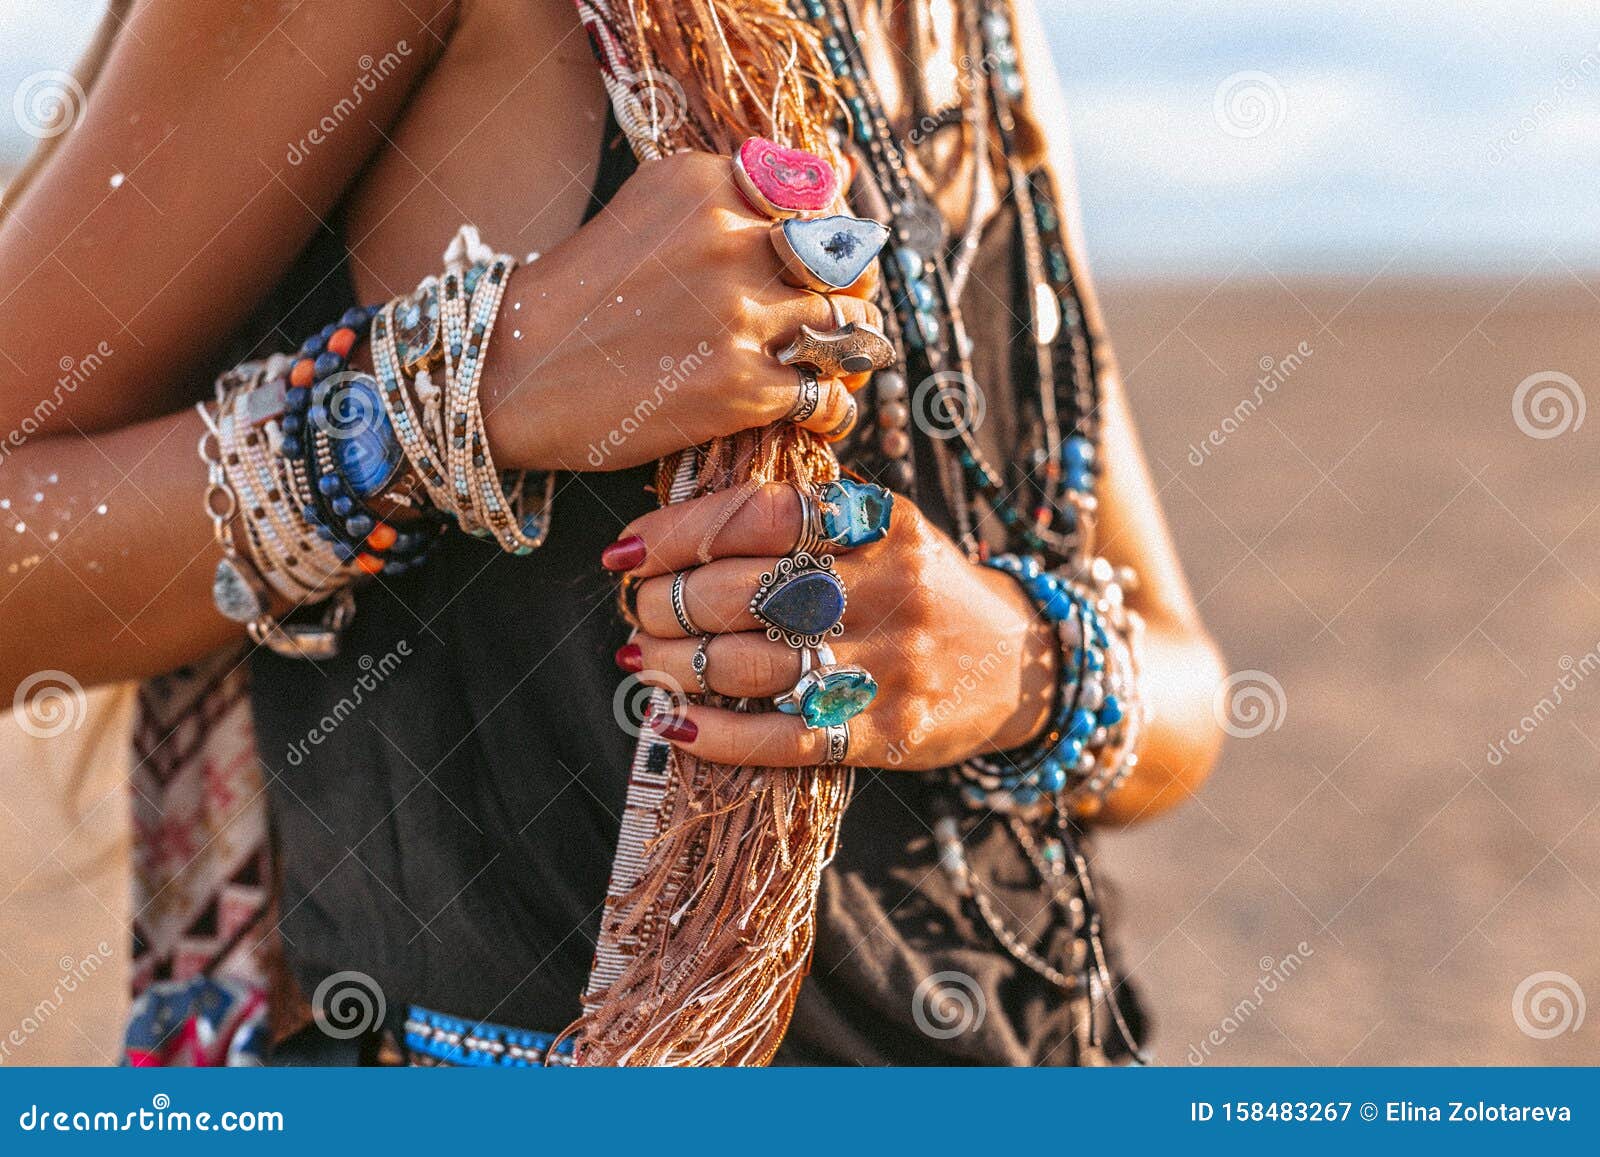 Close Up of Young Boho Style Woman Hands with Lots of Stock Image - of accessories: 158483267